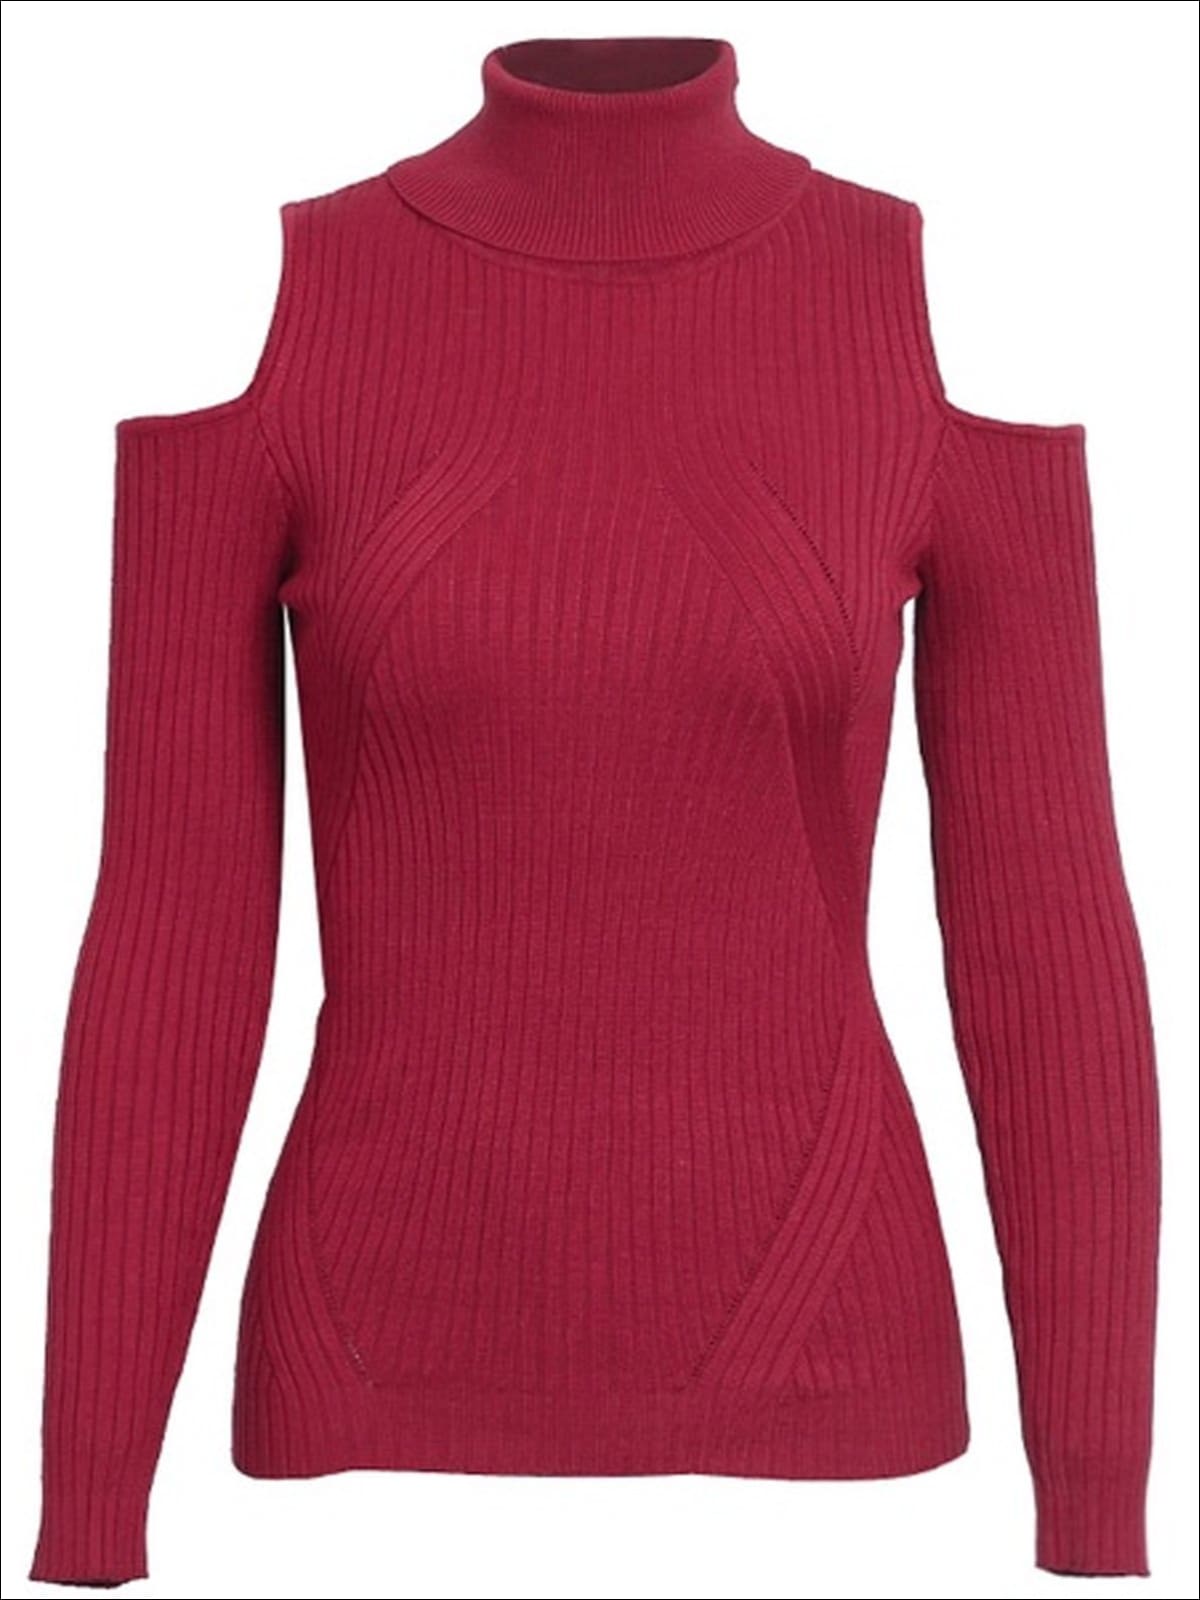 Womens Fall Cozy Knitted Cold Shoulder Sweater - Red / S/M - Womens Fall Sweaters